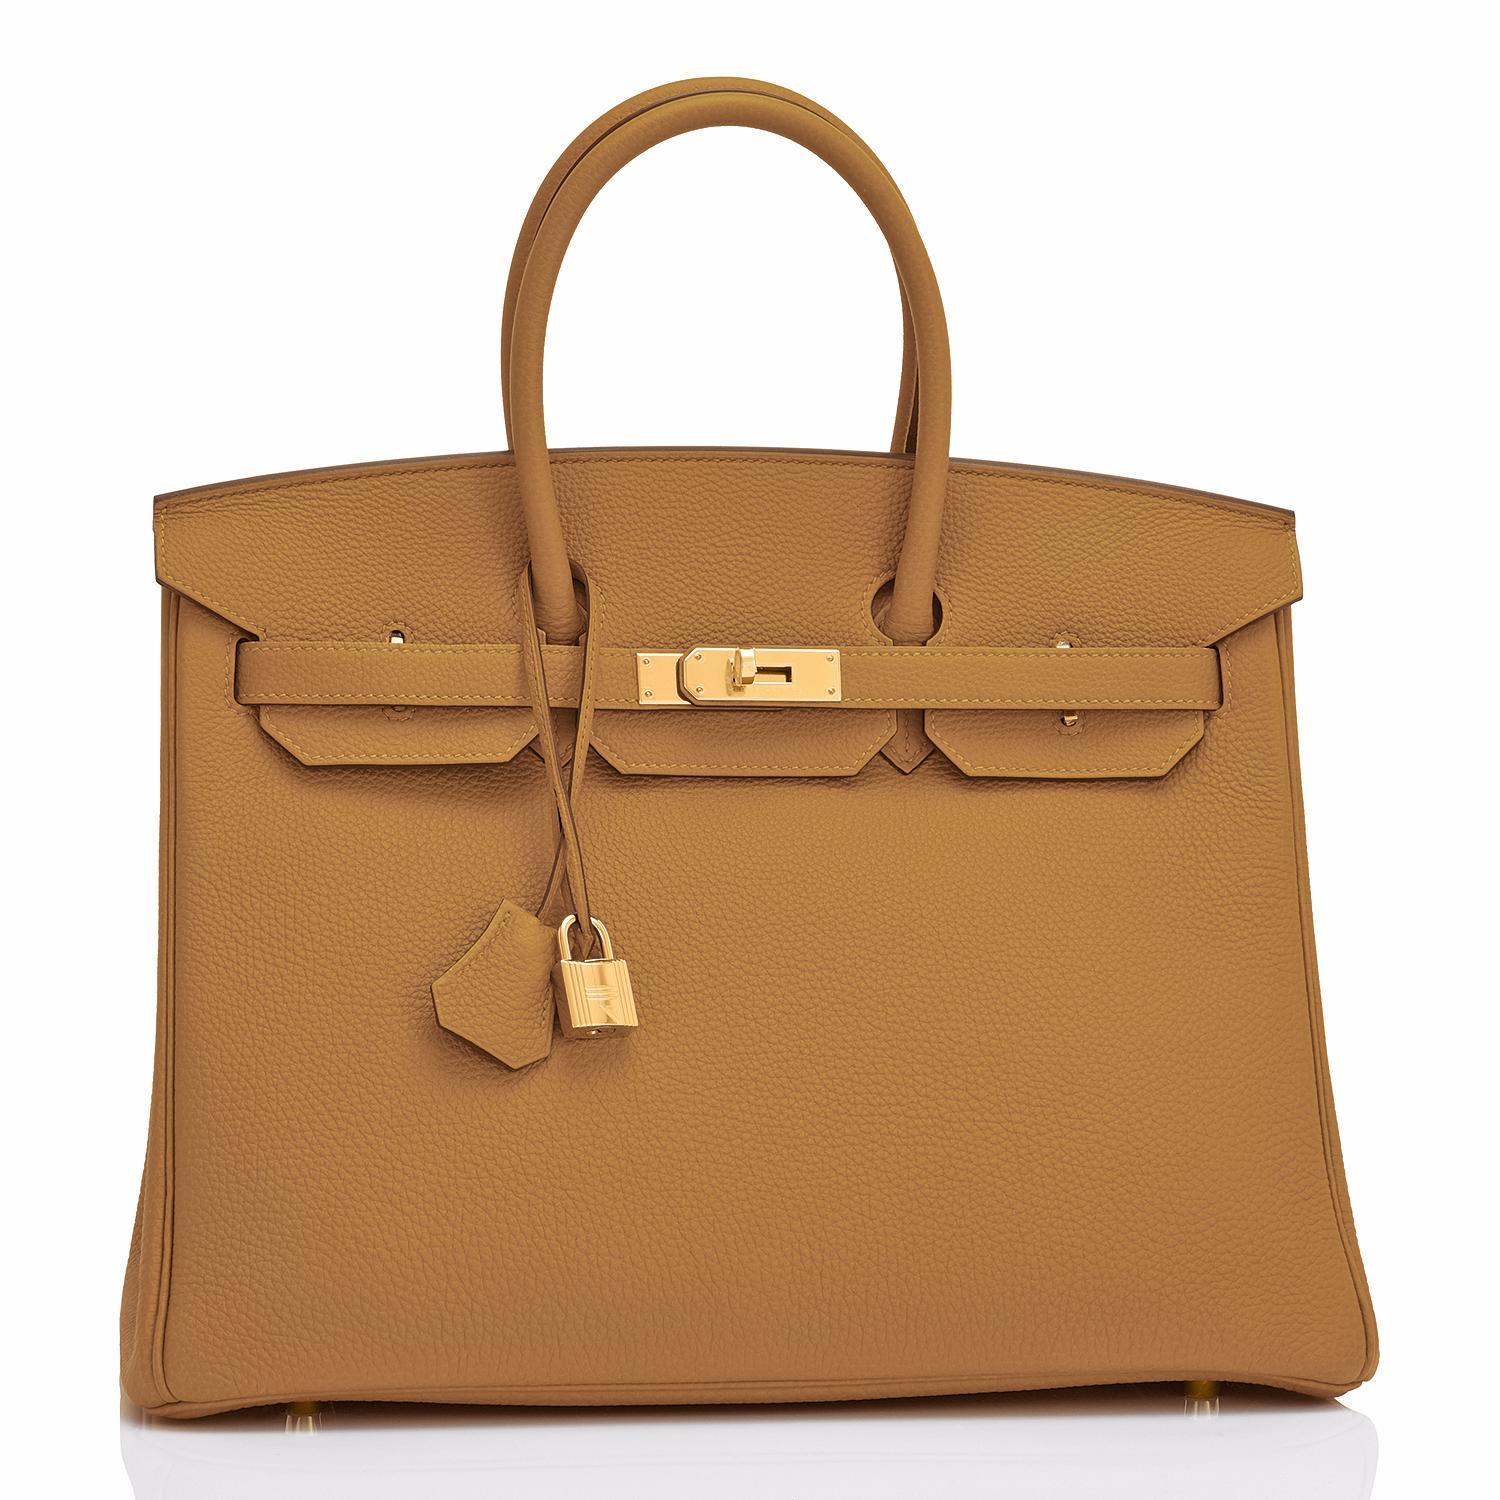 Hermes Birkin 35cm Bronze Dore Togo Gold Tan Khaki Bag Y Stamp, 2020
Just purchased from Hermes store! Bag bears new interior 2020 Y Stamp!
Brand New in Box. Store Fresh. Pristine Condition (with plastic on hardware). 
Perfect gift! Comes with lock,